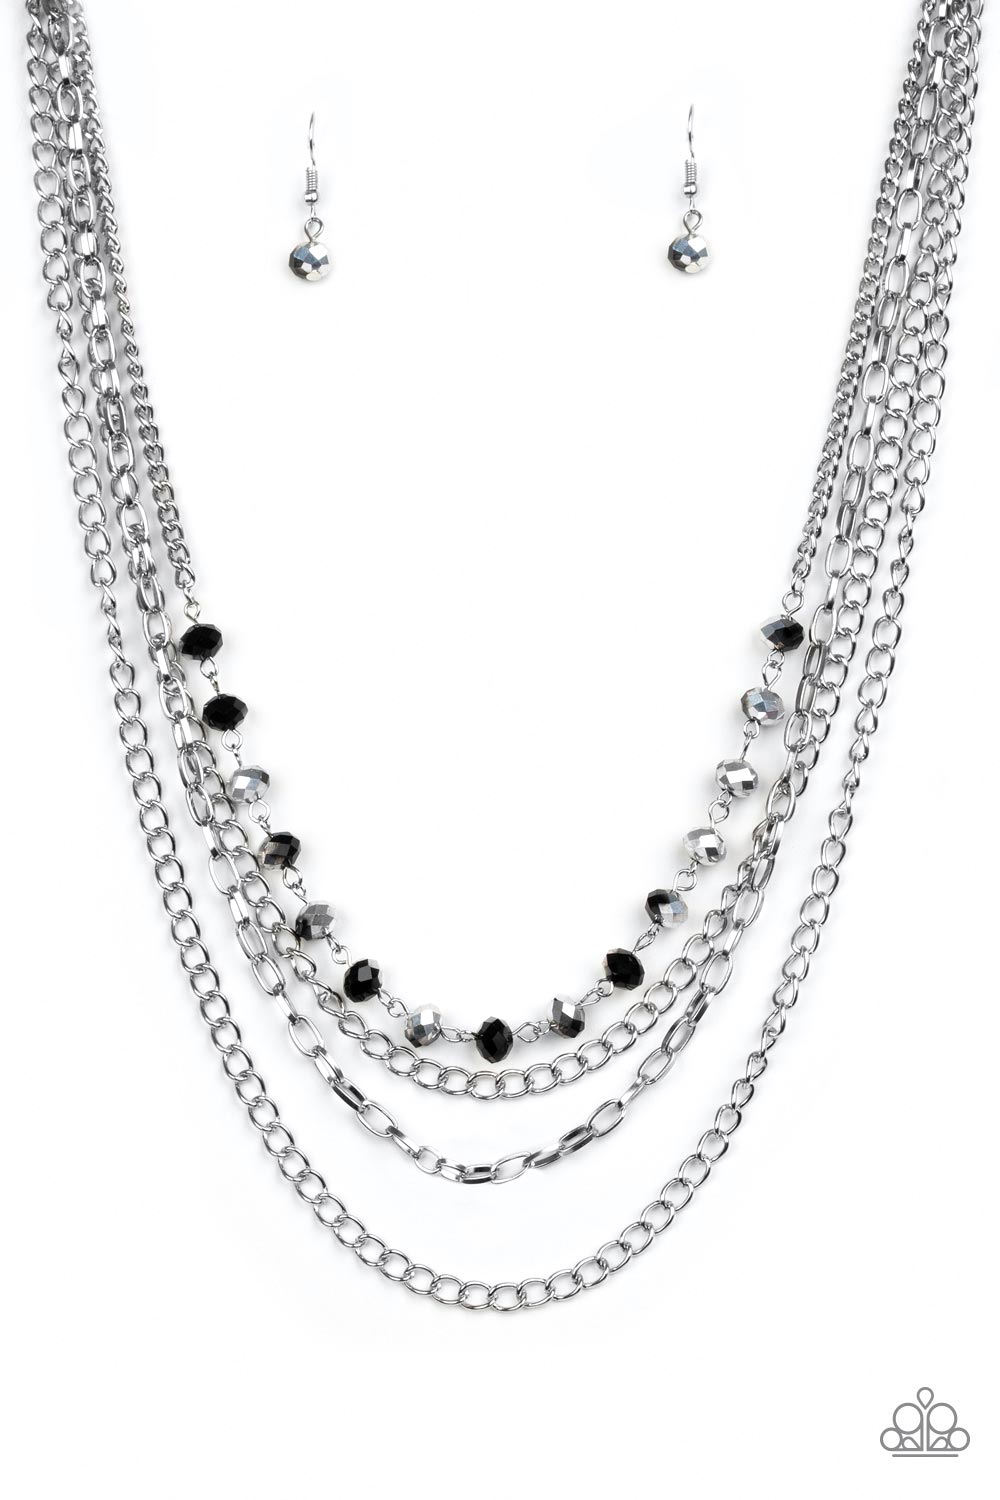 Extravagant Elegance Multi Necklace - Paparazzi Accessories  Mismatched silver chains layer down the chest. Dipped in a metallic sheen, a strand of faceted black beads joins below the collar for a glamorous look. Features an adjustable clasp closure.  All Paparazzi Accessories are lead free and nickel free!  Sold as one individual necklace. Includes one pair of matching earrings.